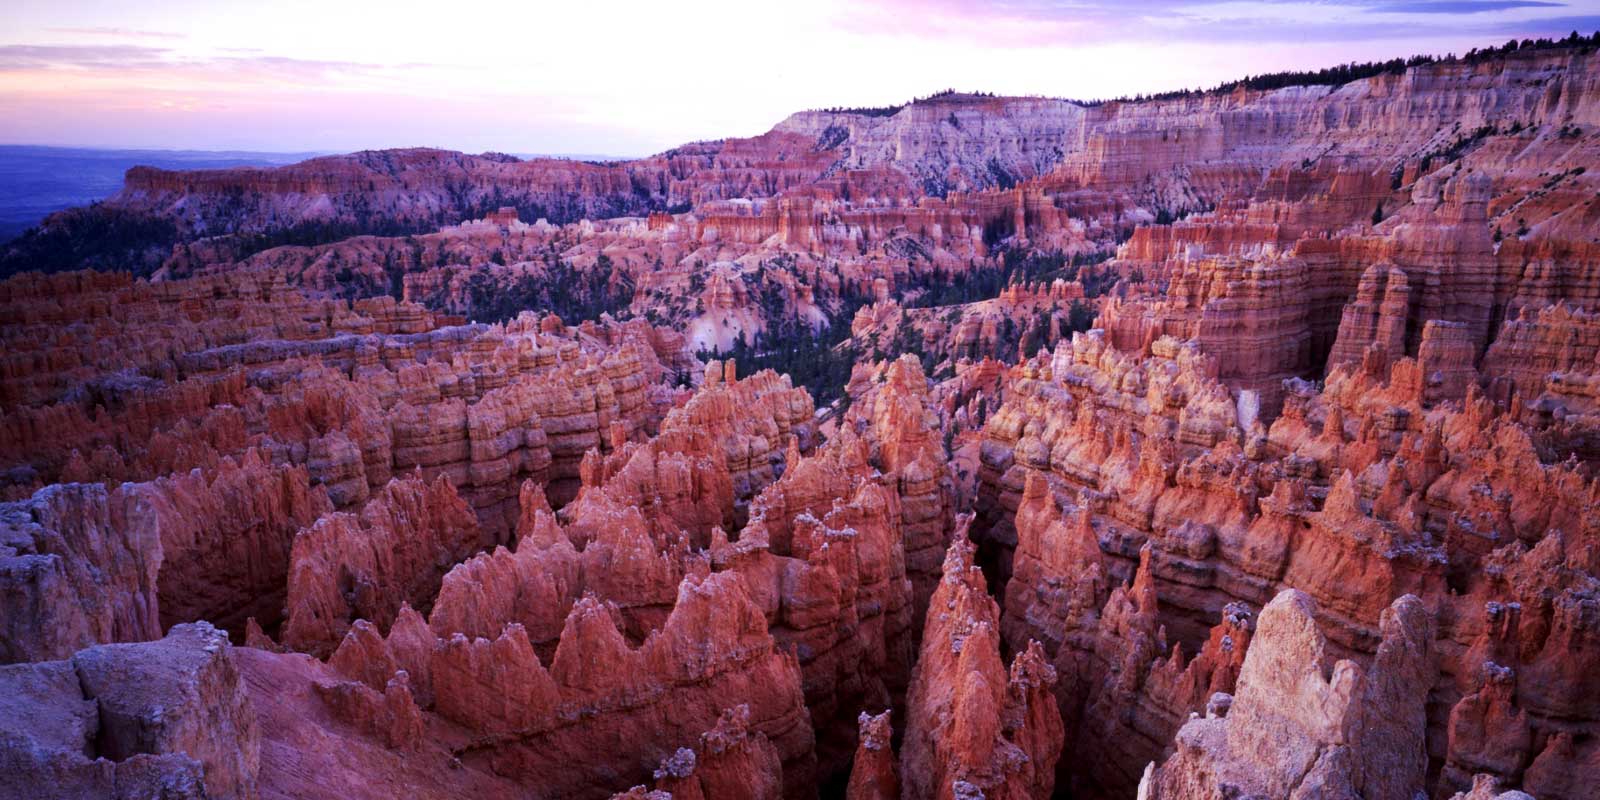 Overlooking the red rock hoodoos from Sunset Point at Bryce Canyon National Park